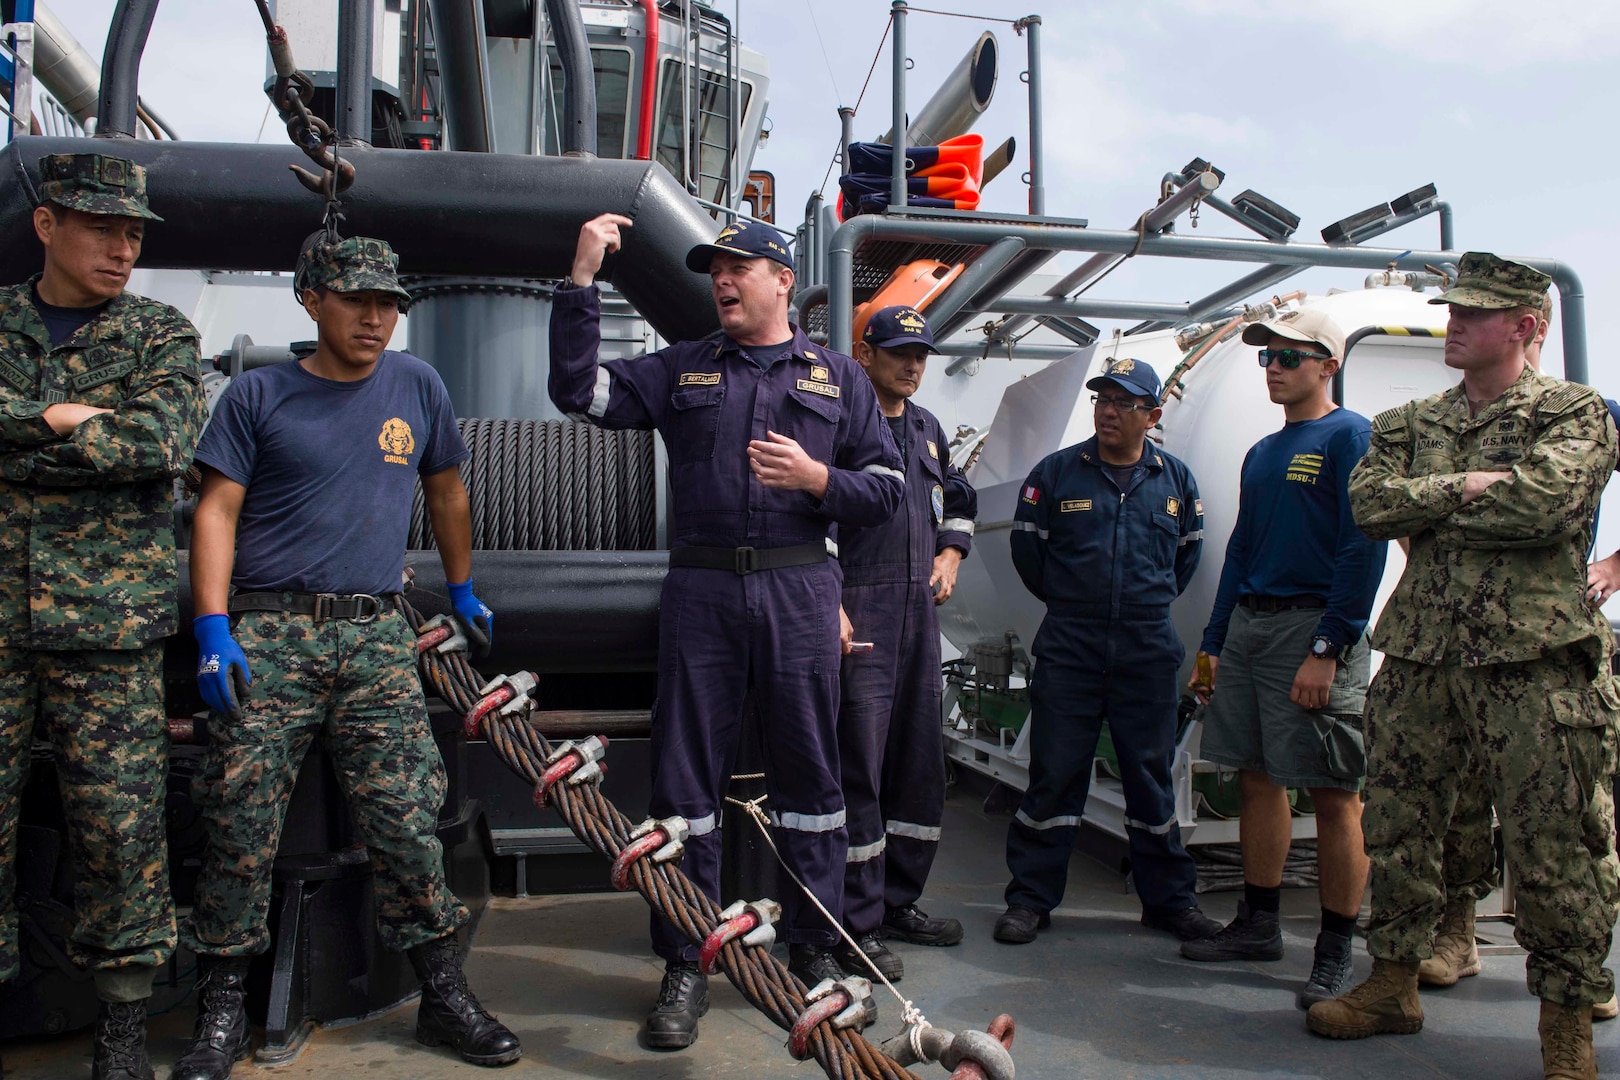 CALLAO, Peru (July 17, 2017) Captain Carlo Mario Bertalmio, commandant of the Peruvian vessel BAP Morales (RAS-180), center, gives a safety briefing to Peruvian and American Sailors before conducting a joint diving and salvage training exercise during UNITAS 2017. UNITAS is an annual, multi-national exercise that focuses on strengthening our existing regional partnerships and encourages establishing new relationships through the exchange of maritime mission-focused knowledge and expertise during multinational training operations. (U.S. Navy photo by Mass Communication Specialist 2nd Class Bill Dodge/Released)